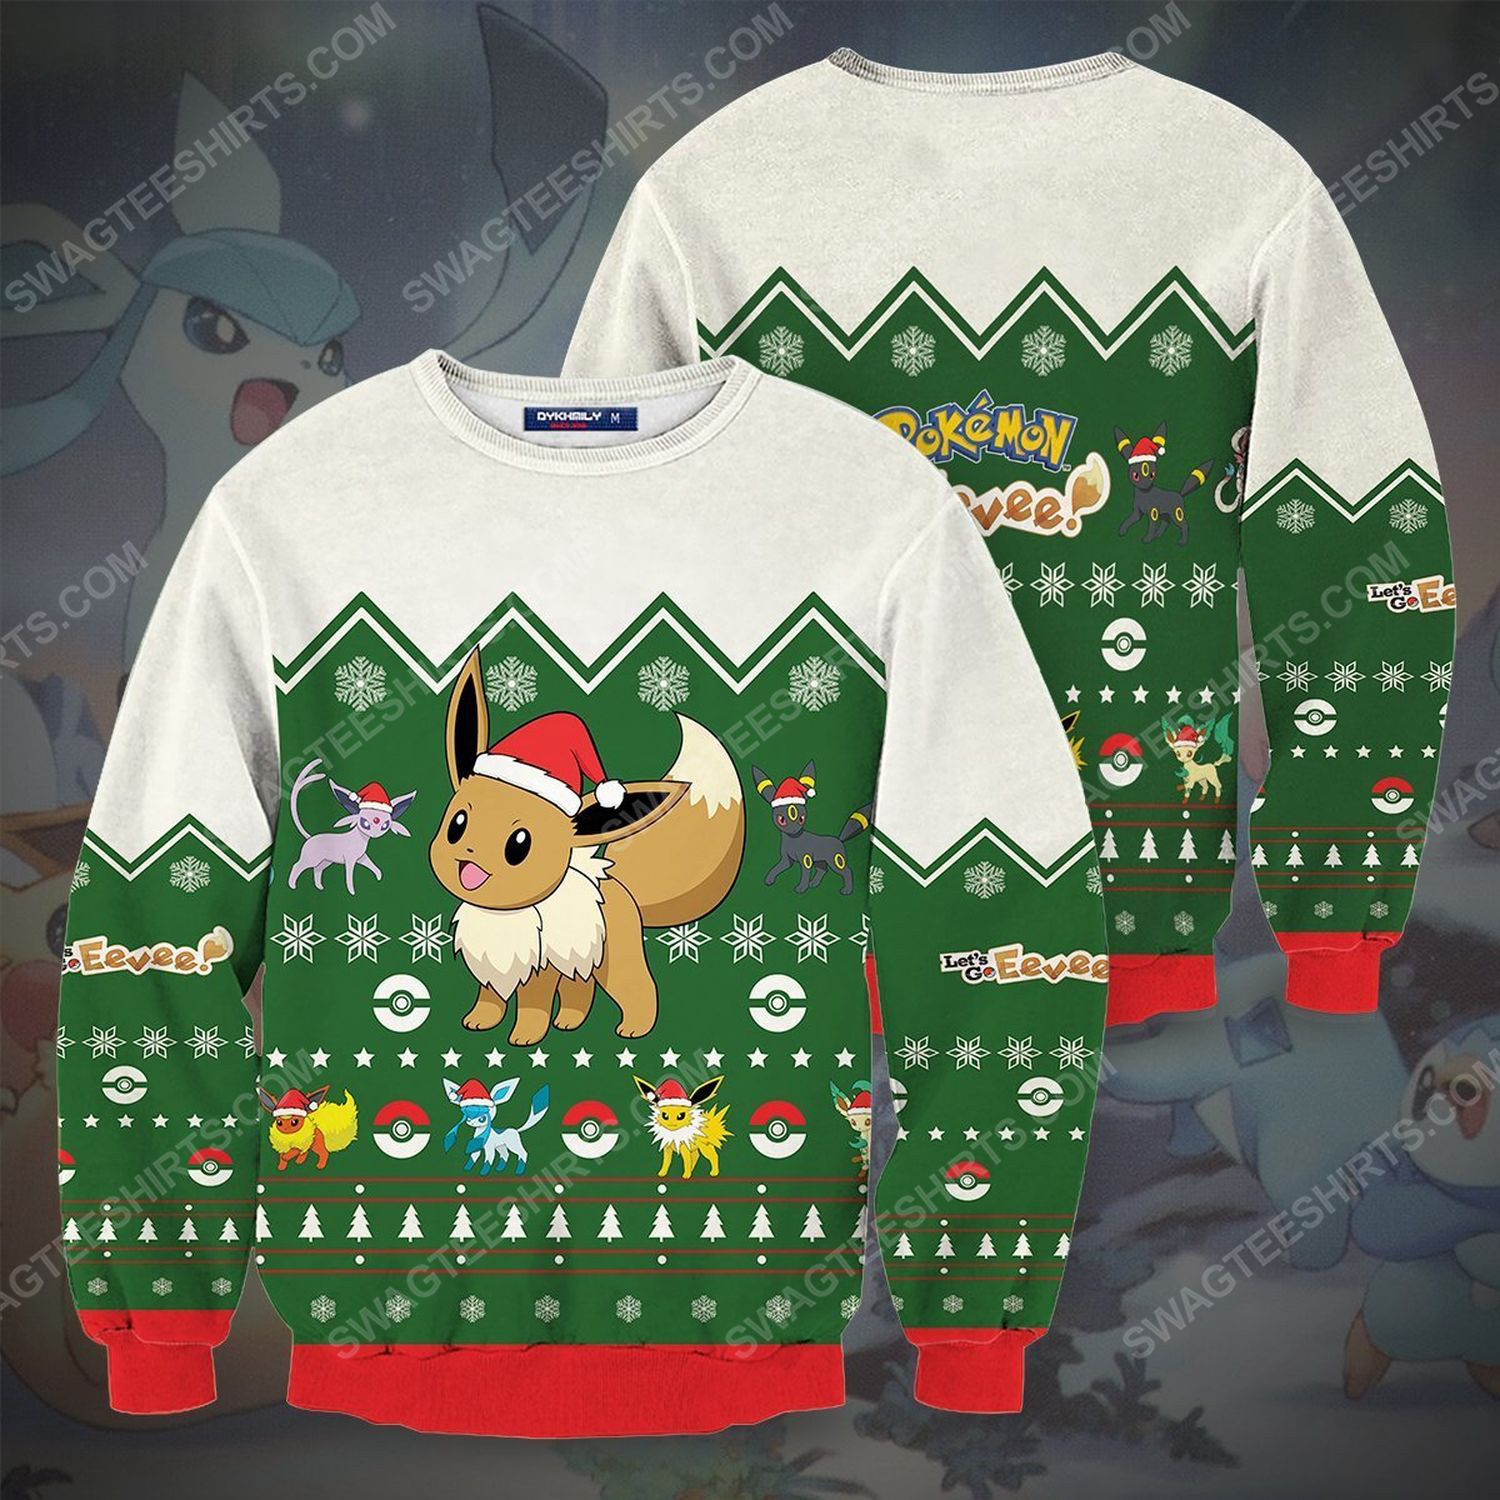 [special edition] Pokemon eevee full print ugly christmas sweater – maria